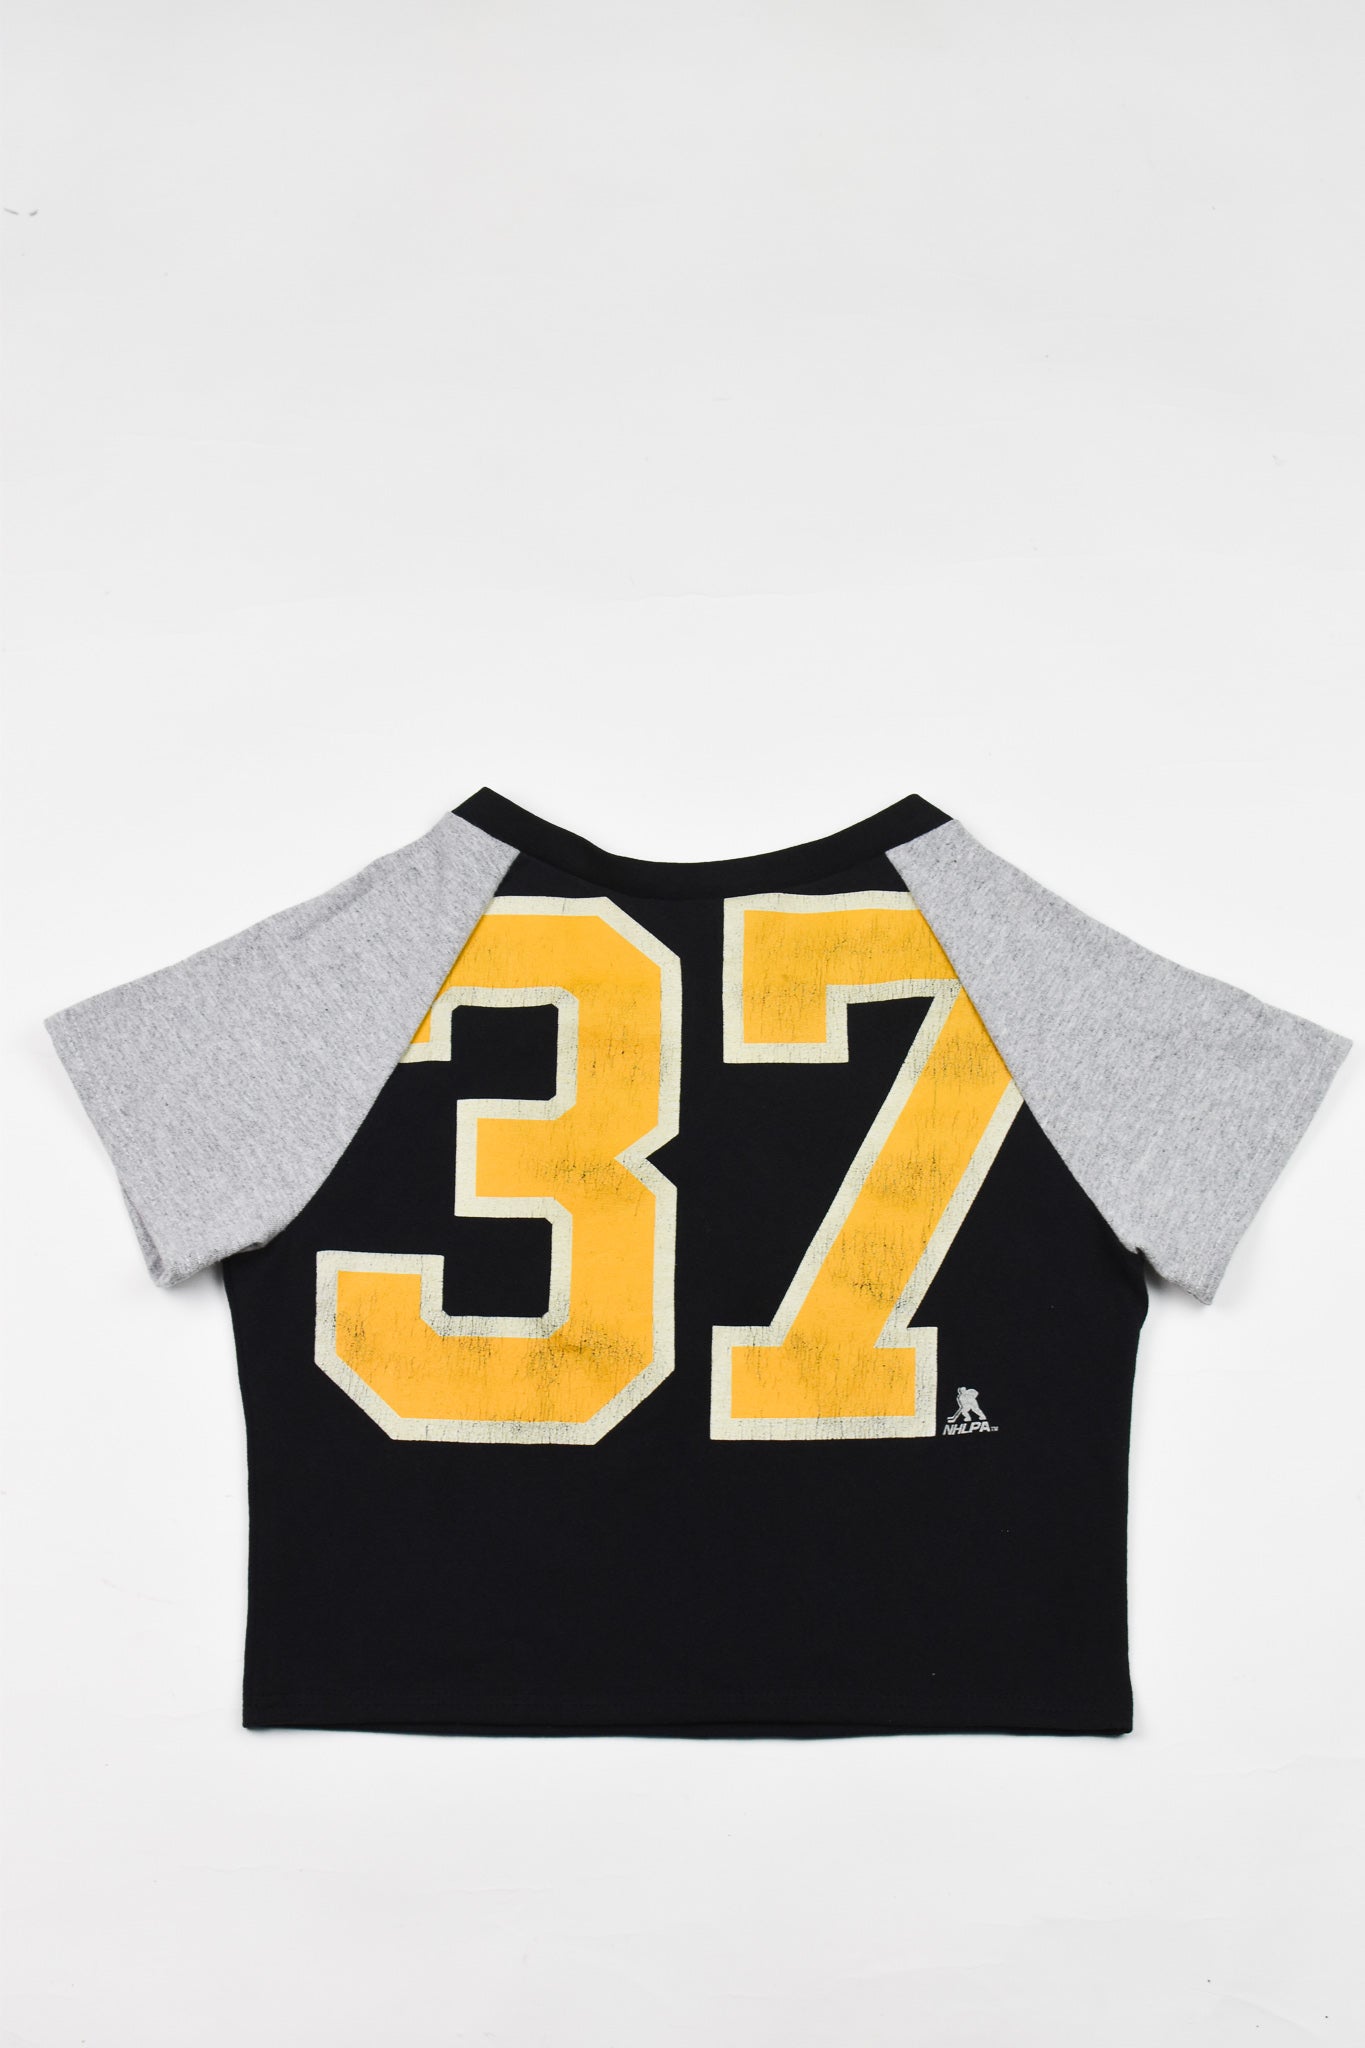 Upcycled Bruins Baby Tee